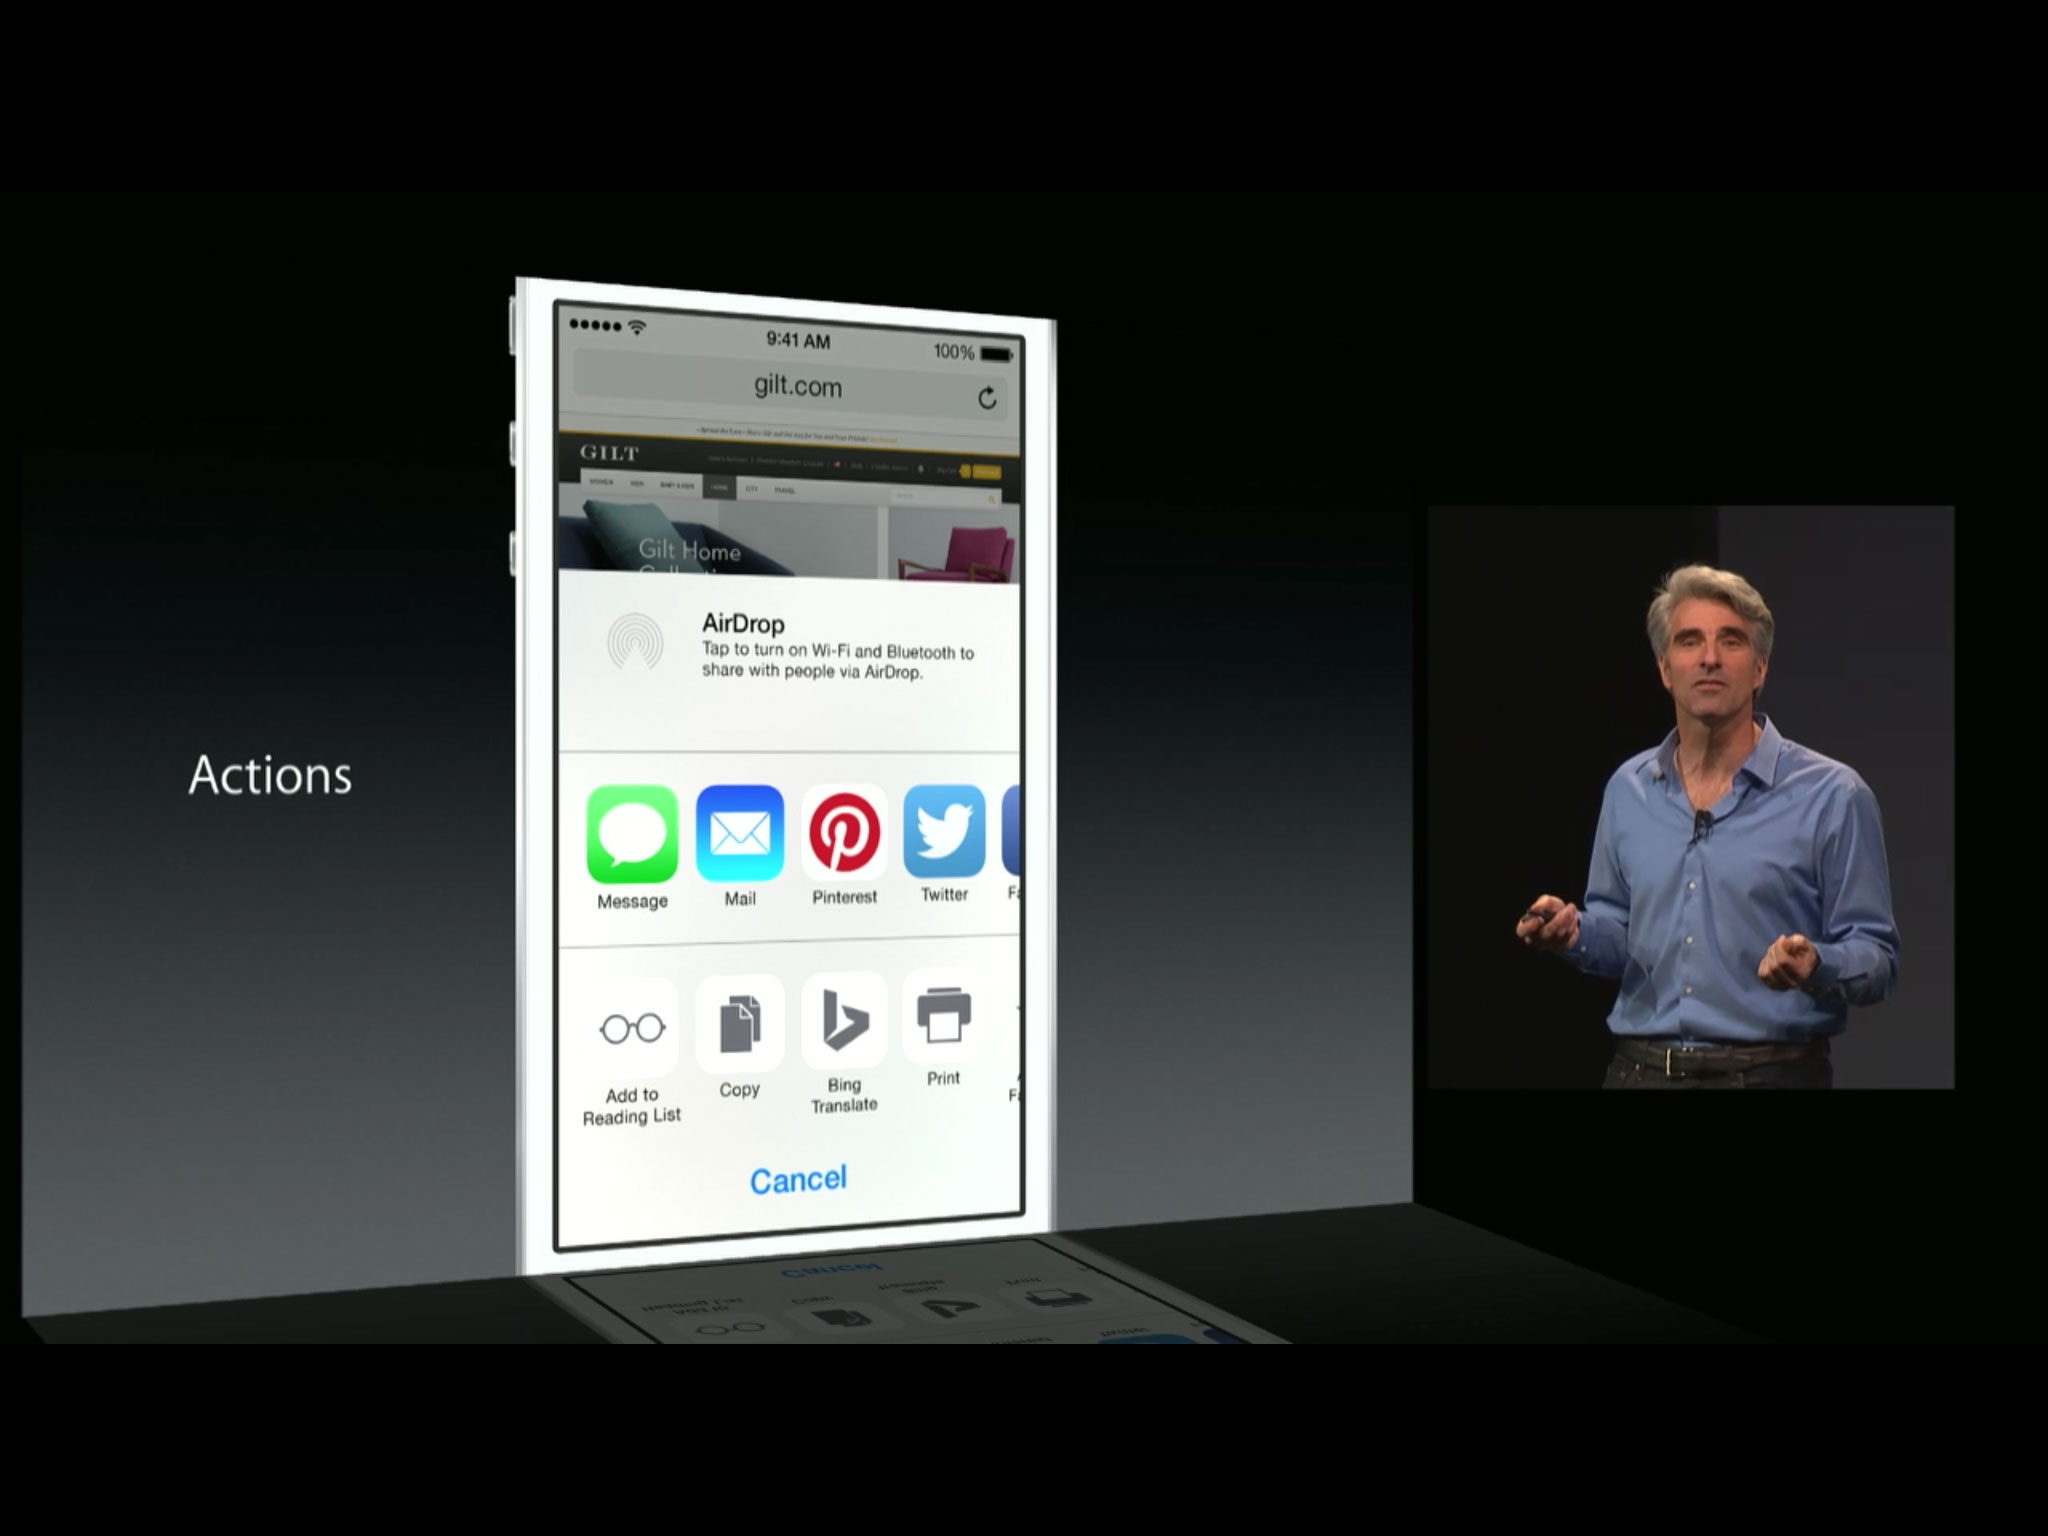 Action extensions in iOS 8: Explained